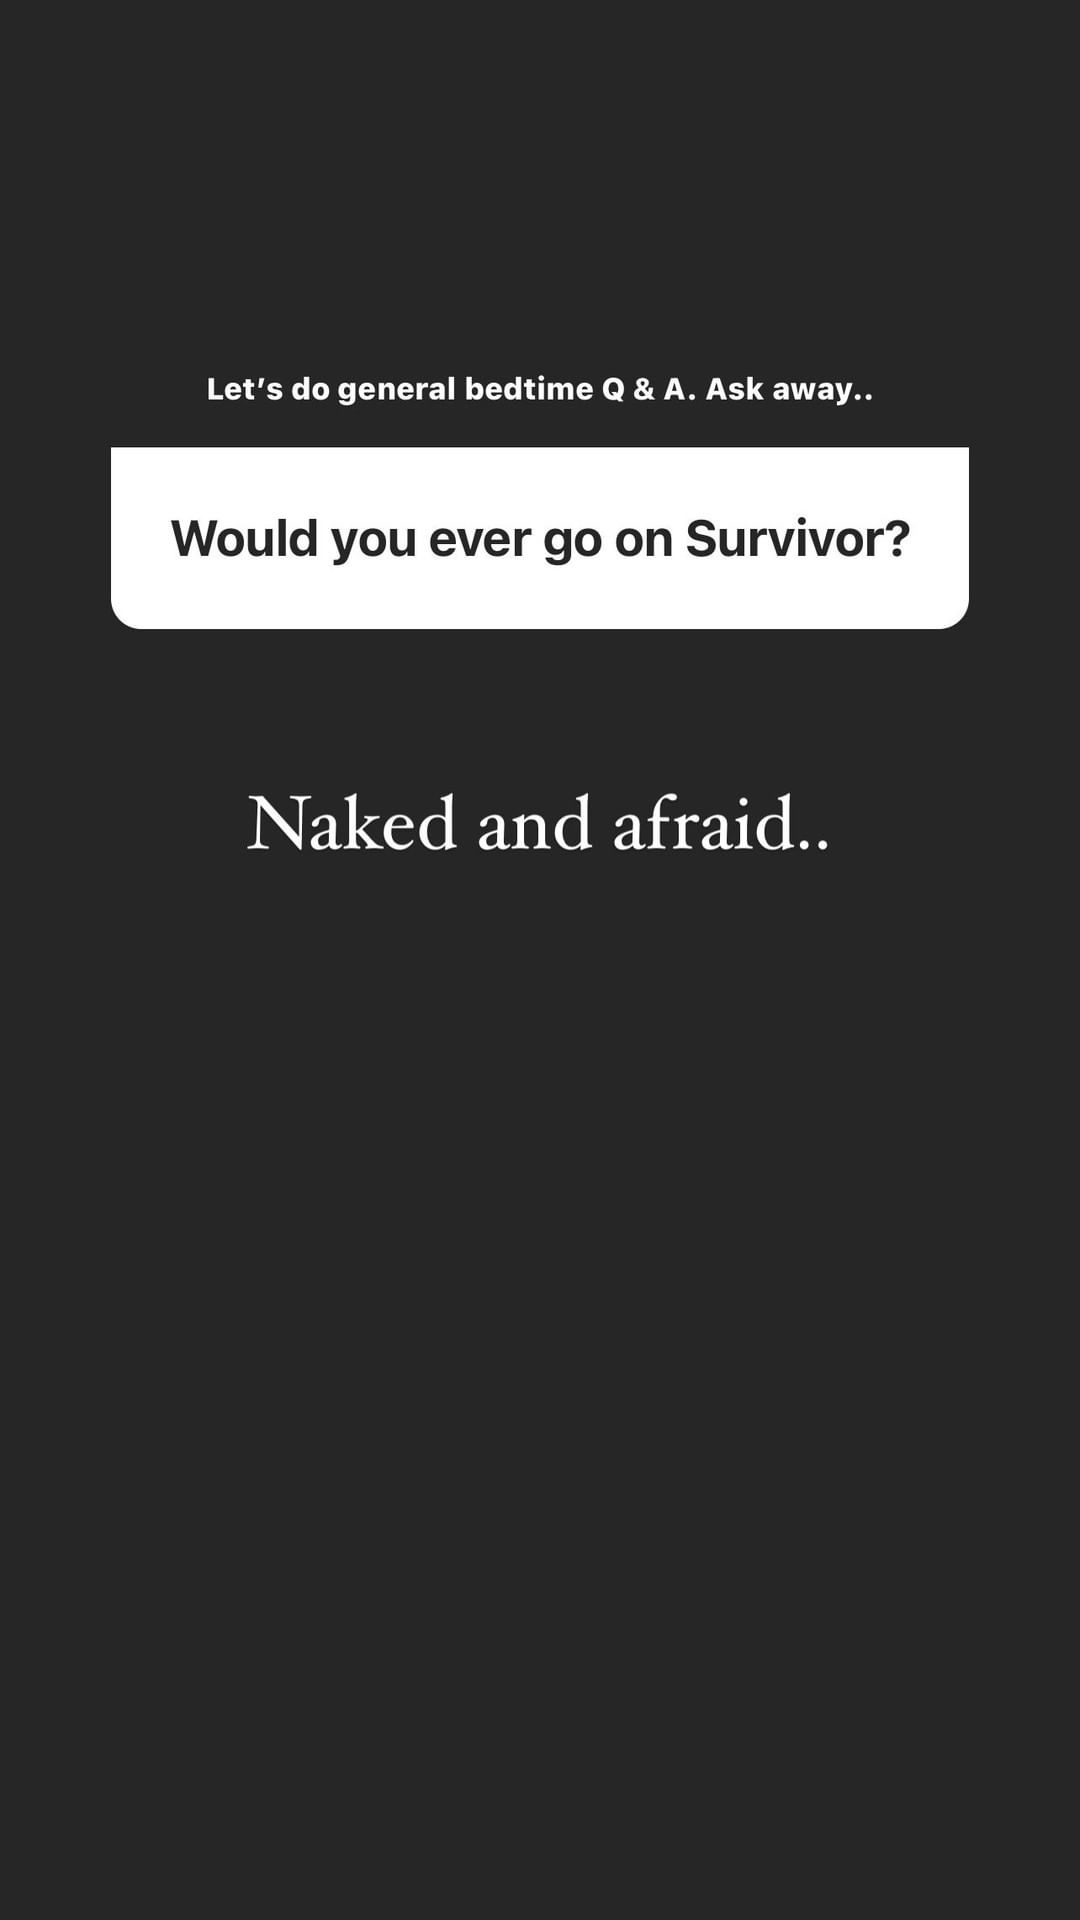 Screenshot Instagram post from Blake Moynes saying he would go on 'Naked and Afraid'